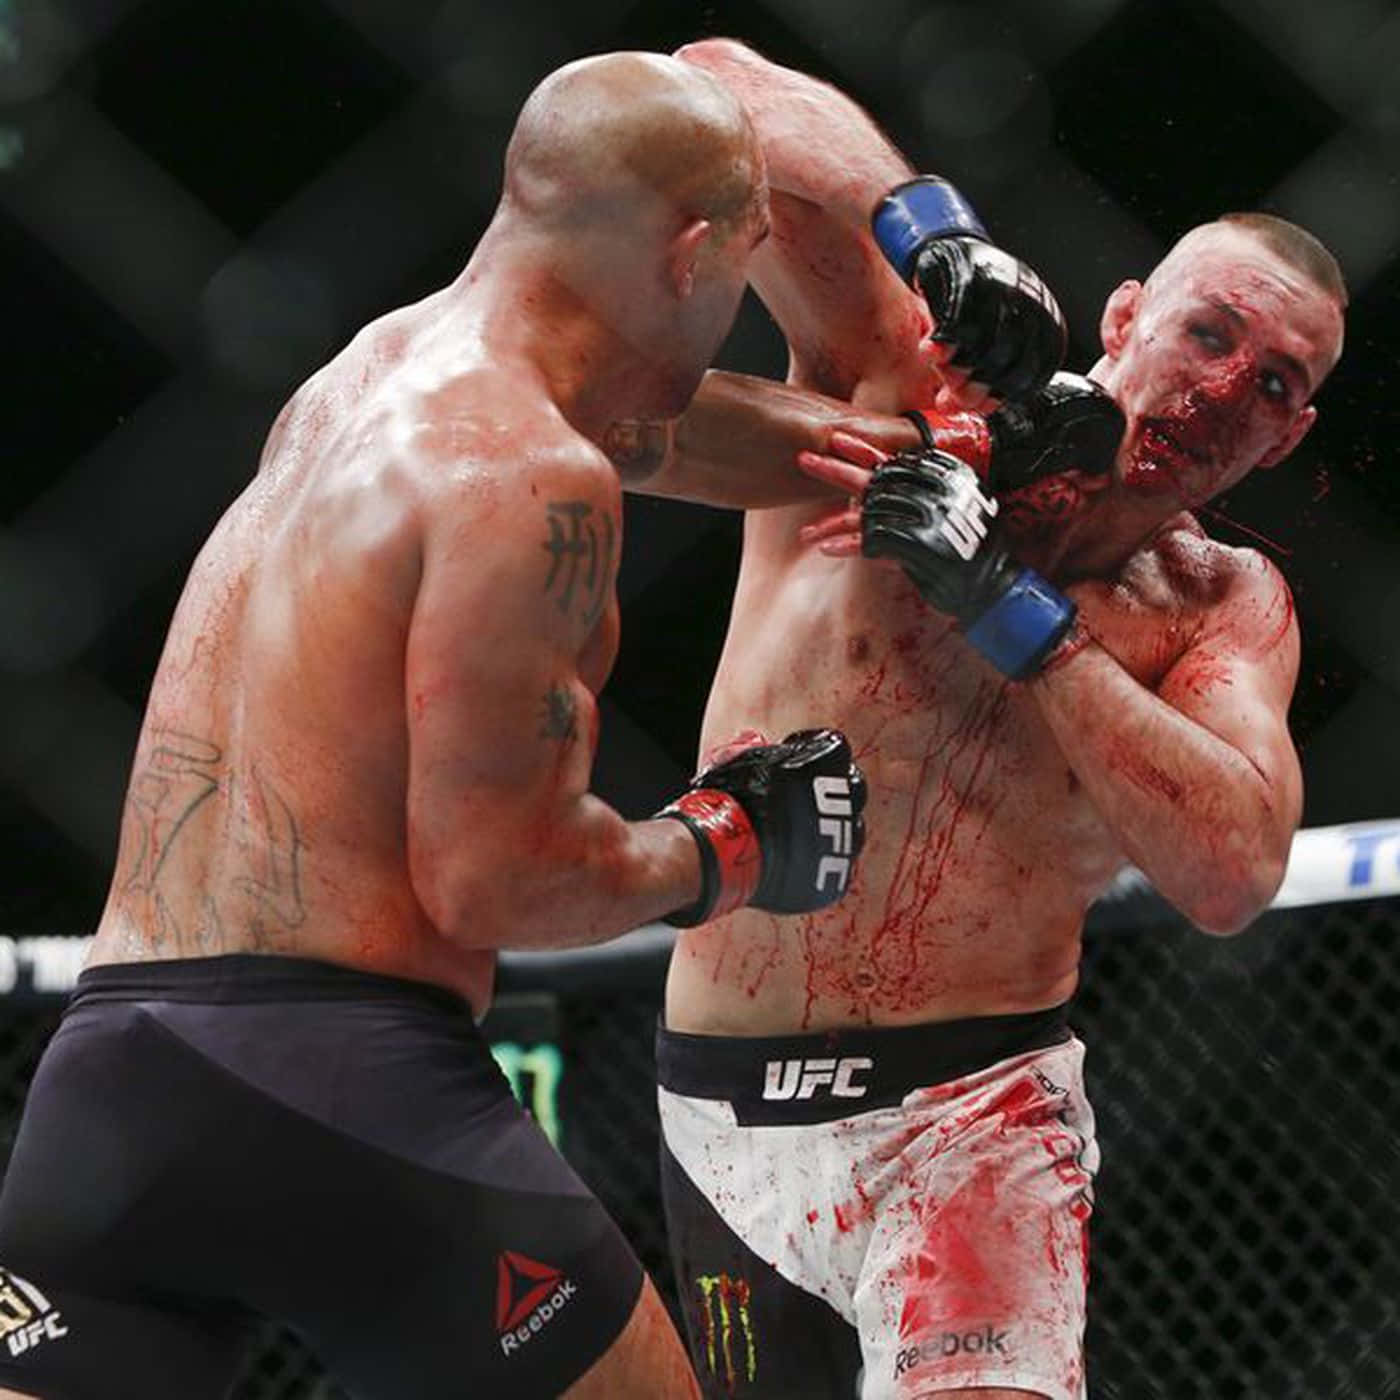 Robbie Lawler triumphant after his iconic fight with Rory MacDonald at UFC 189 Wallpaper